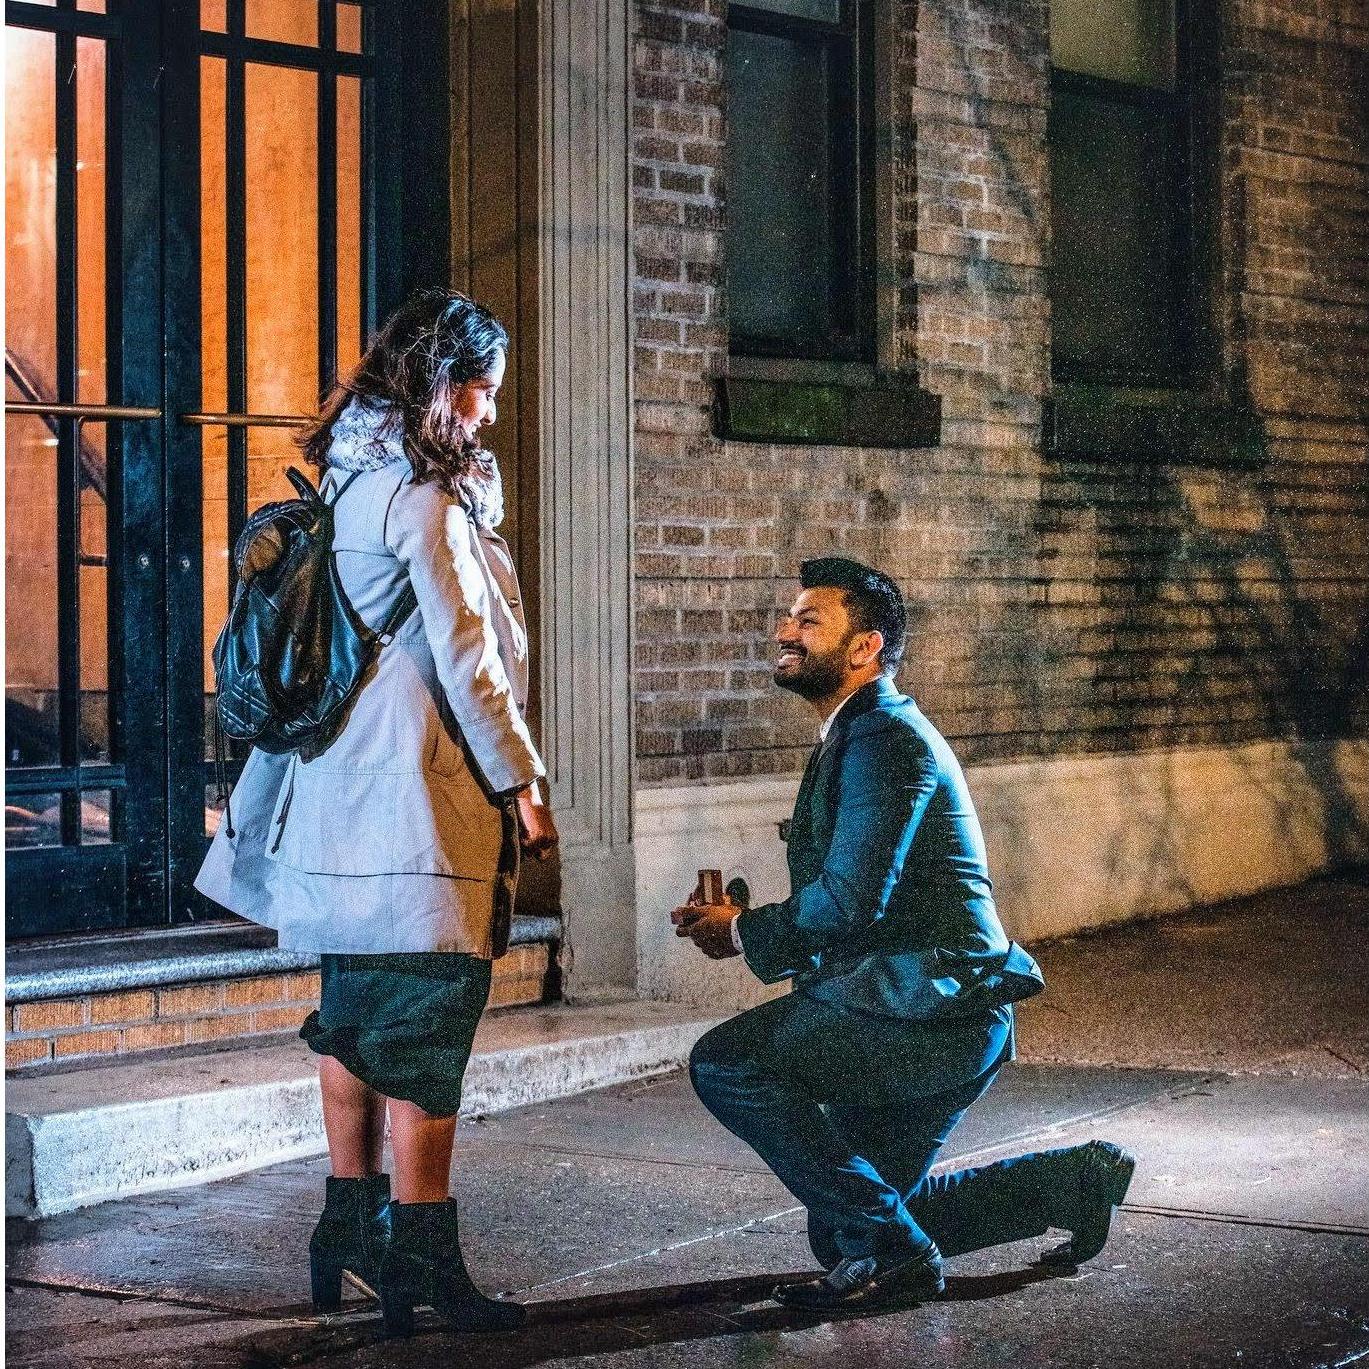 On December 30, 2020, Abhishek proposed to Sahanna in the same city where their relationship first began...in New York City outside of Sahanna's old apartment.